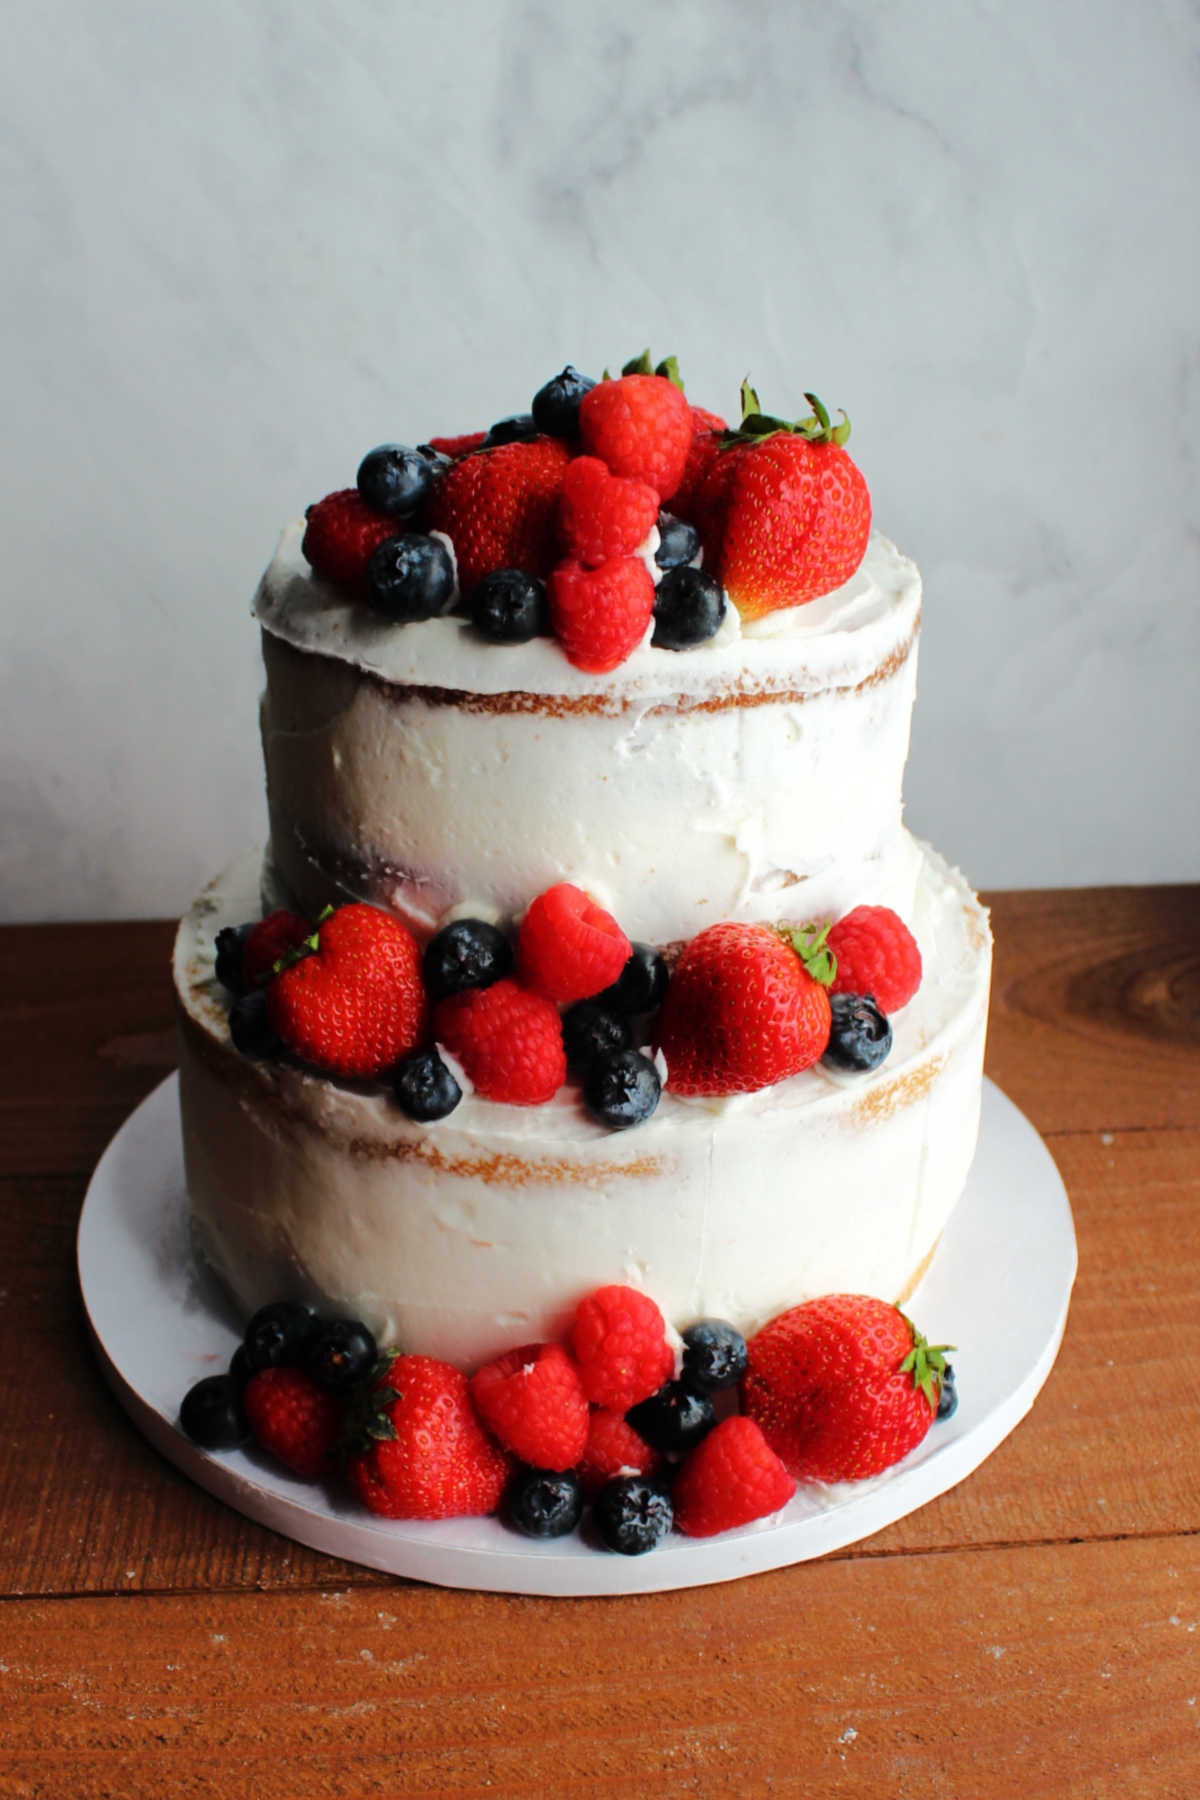 Tiered semi-naked wedding cake decorated with strawberries, raspberries and blueberries.